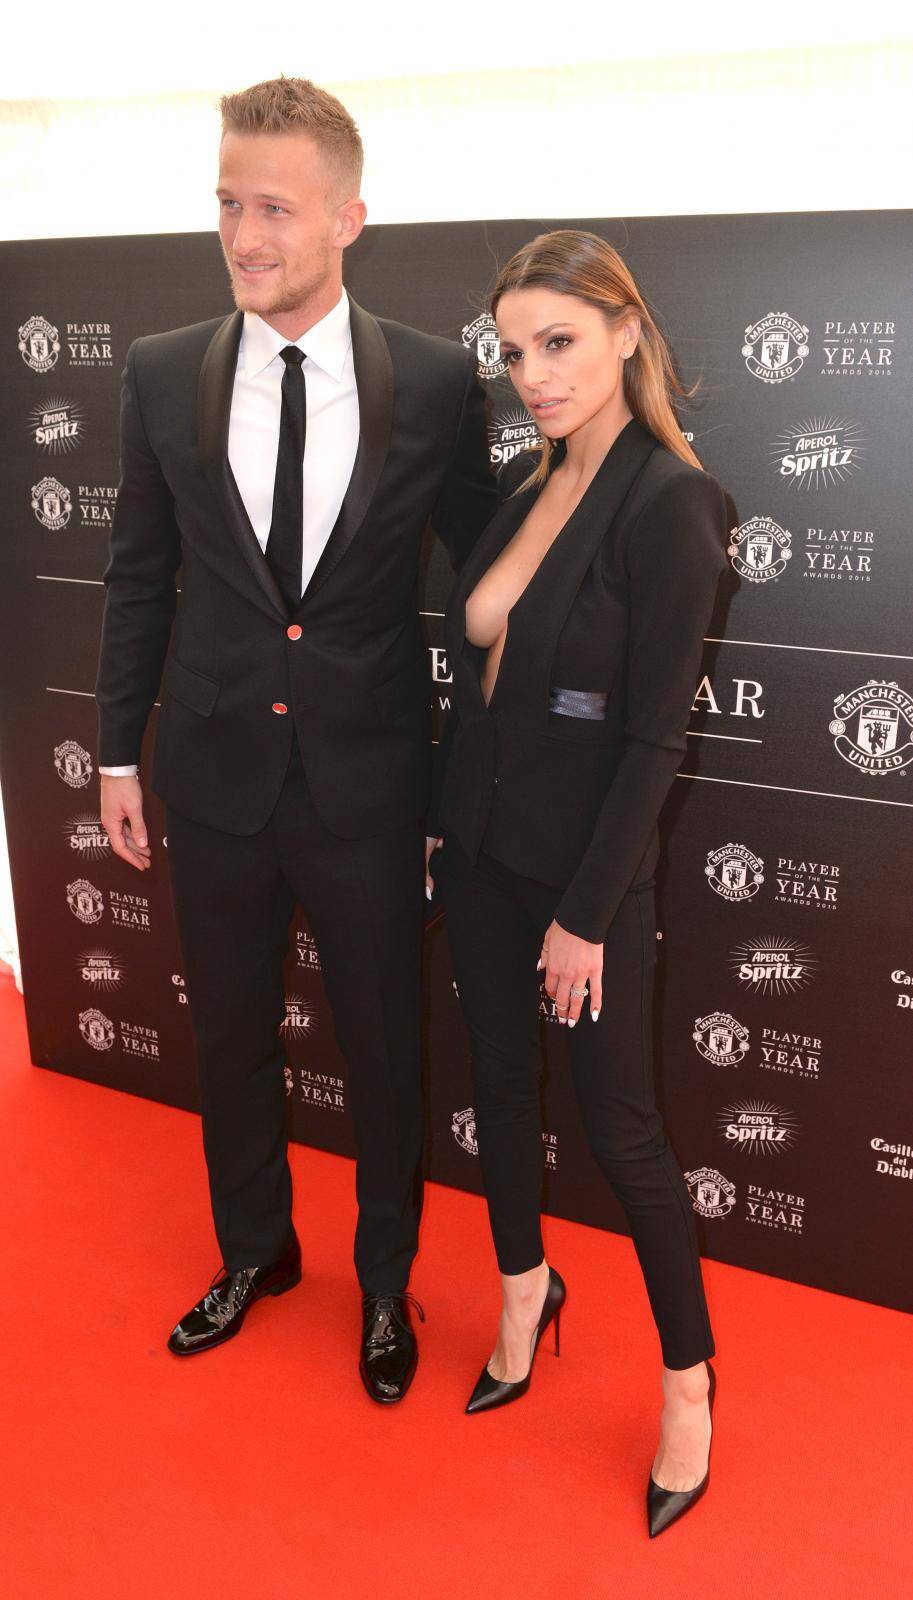 Manchester United's player awards ceremony.